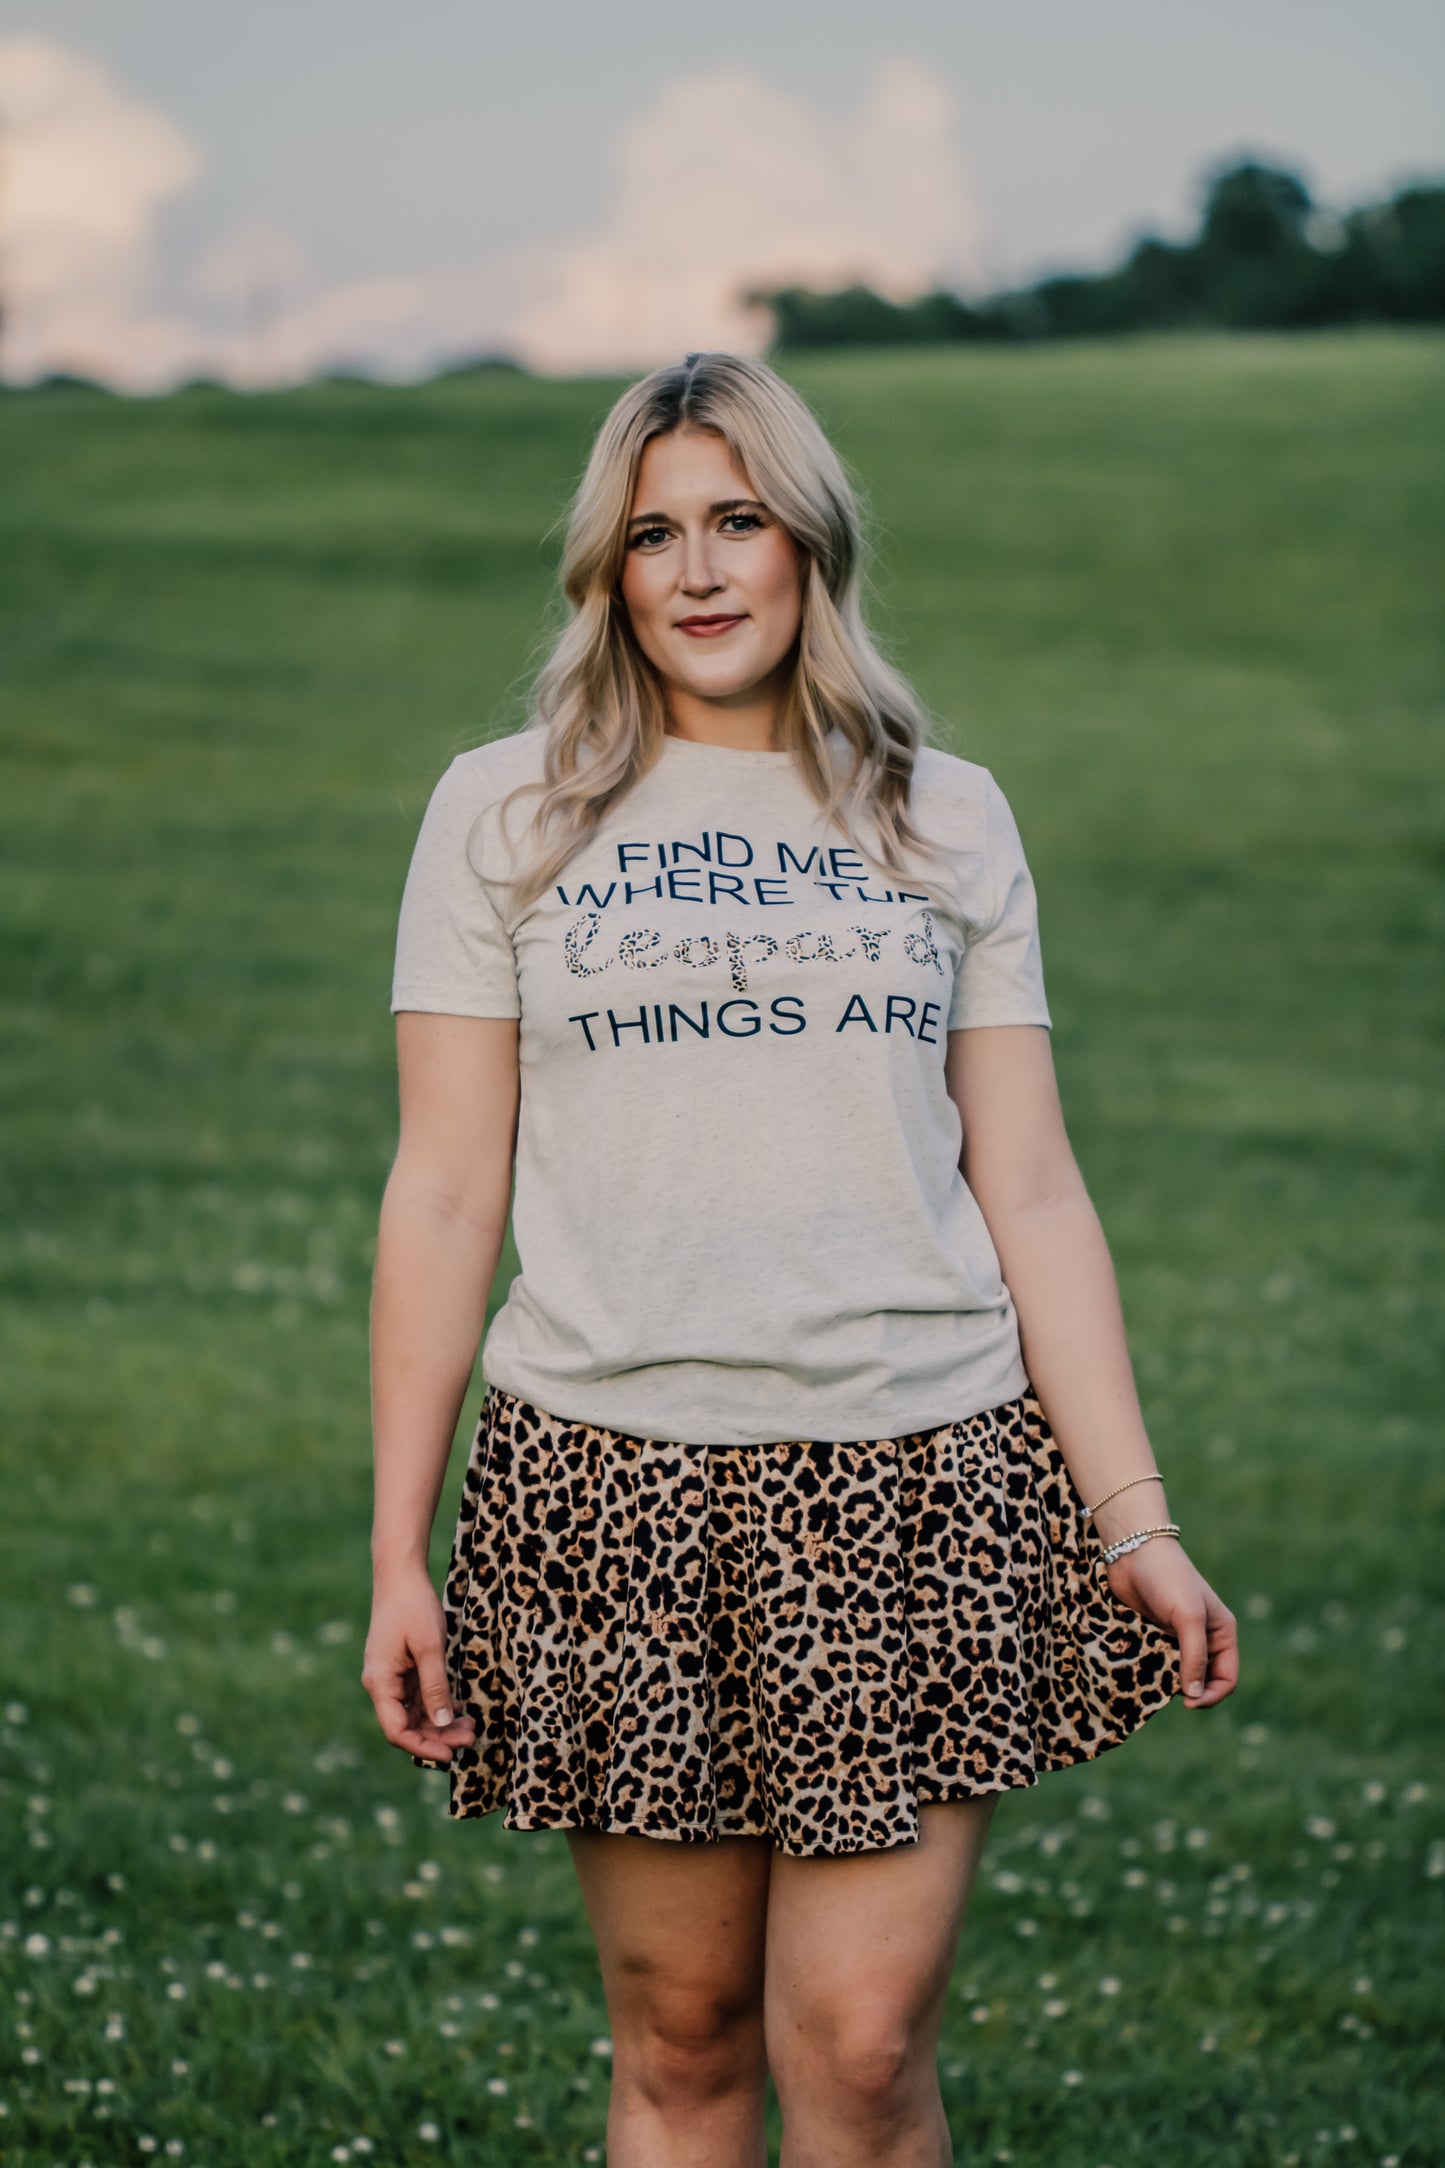 Find Me Where the Leopard Things Are - Graphic Tee